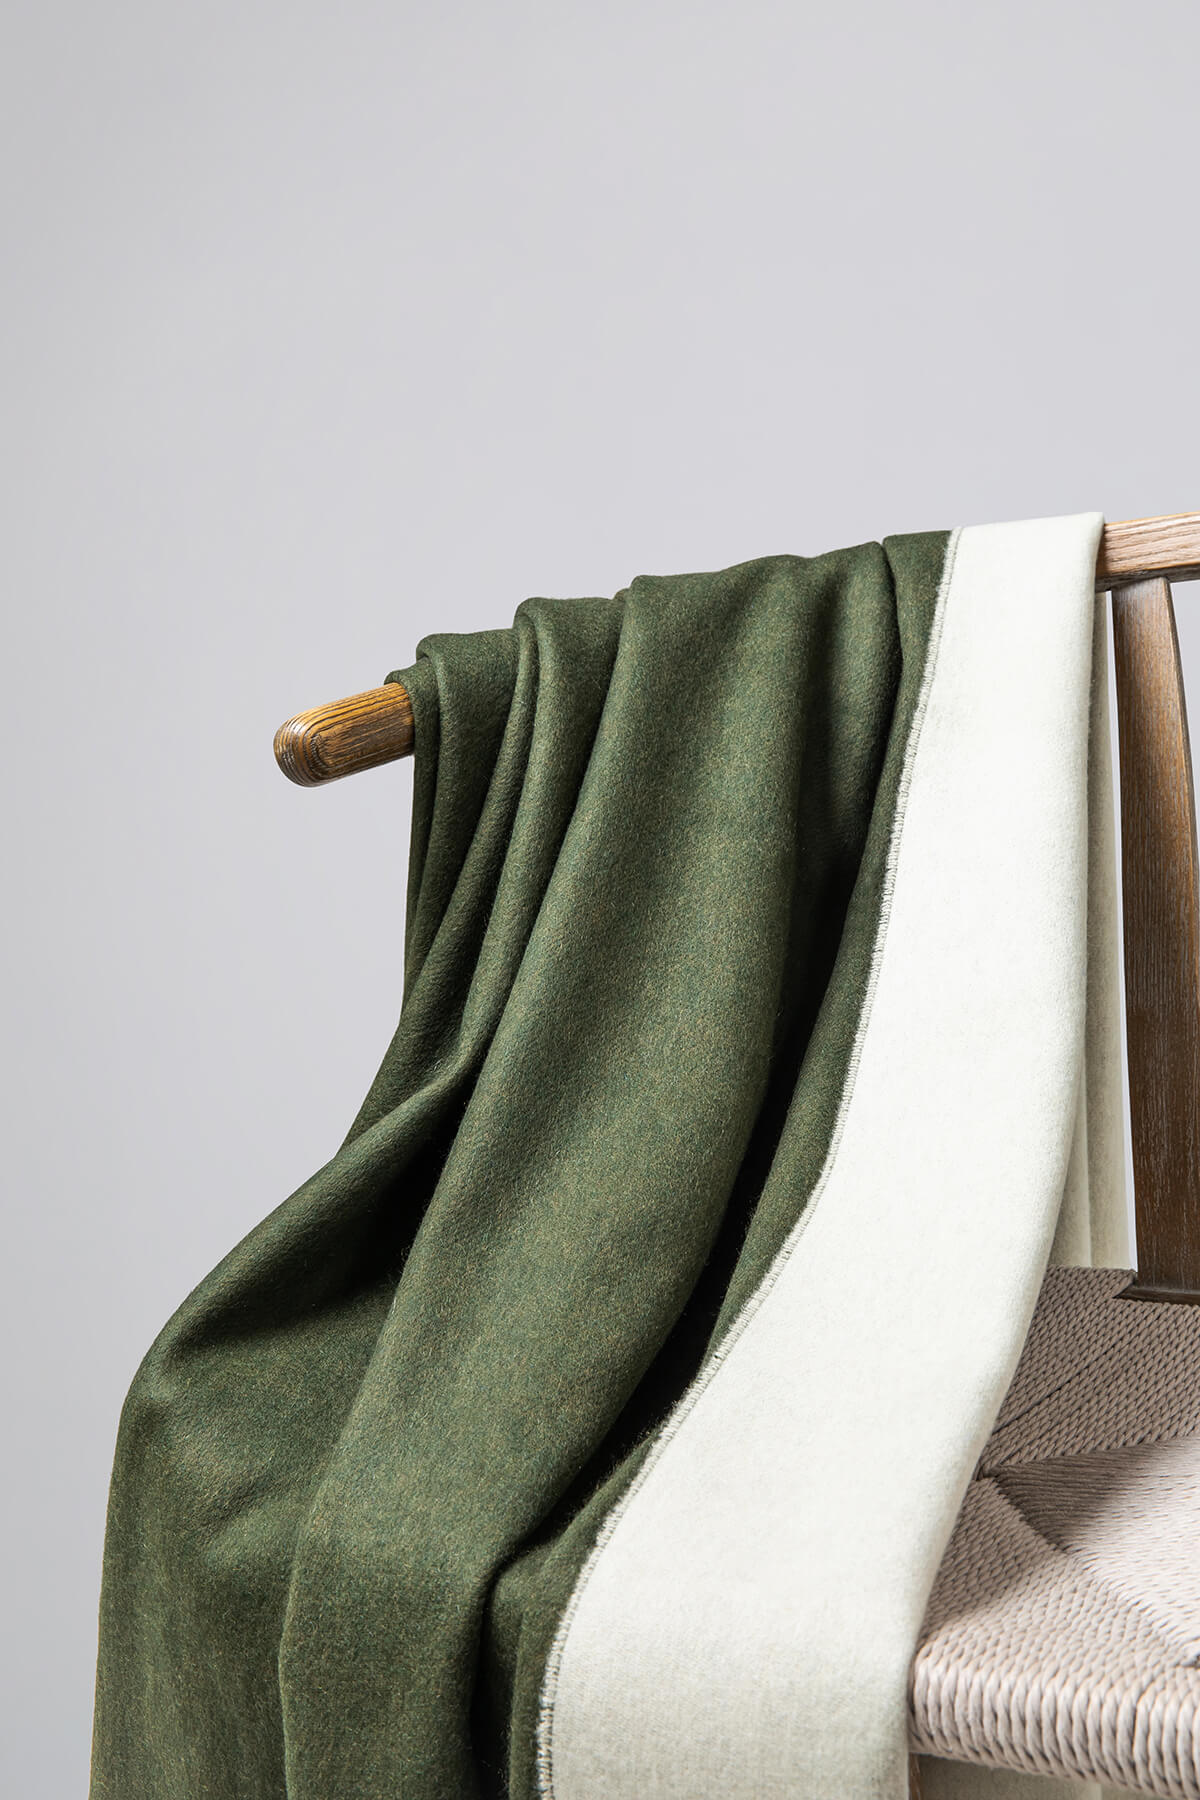 Details of Johnstons of Elgin Reversible Pure Cashmere Throw in Forest Green & Pale Olivine draped over a wooden chair on a white background WA000013RU7255ONE